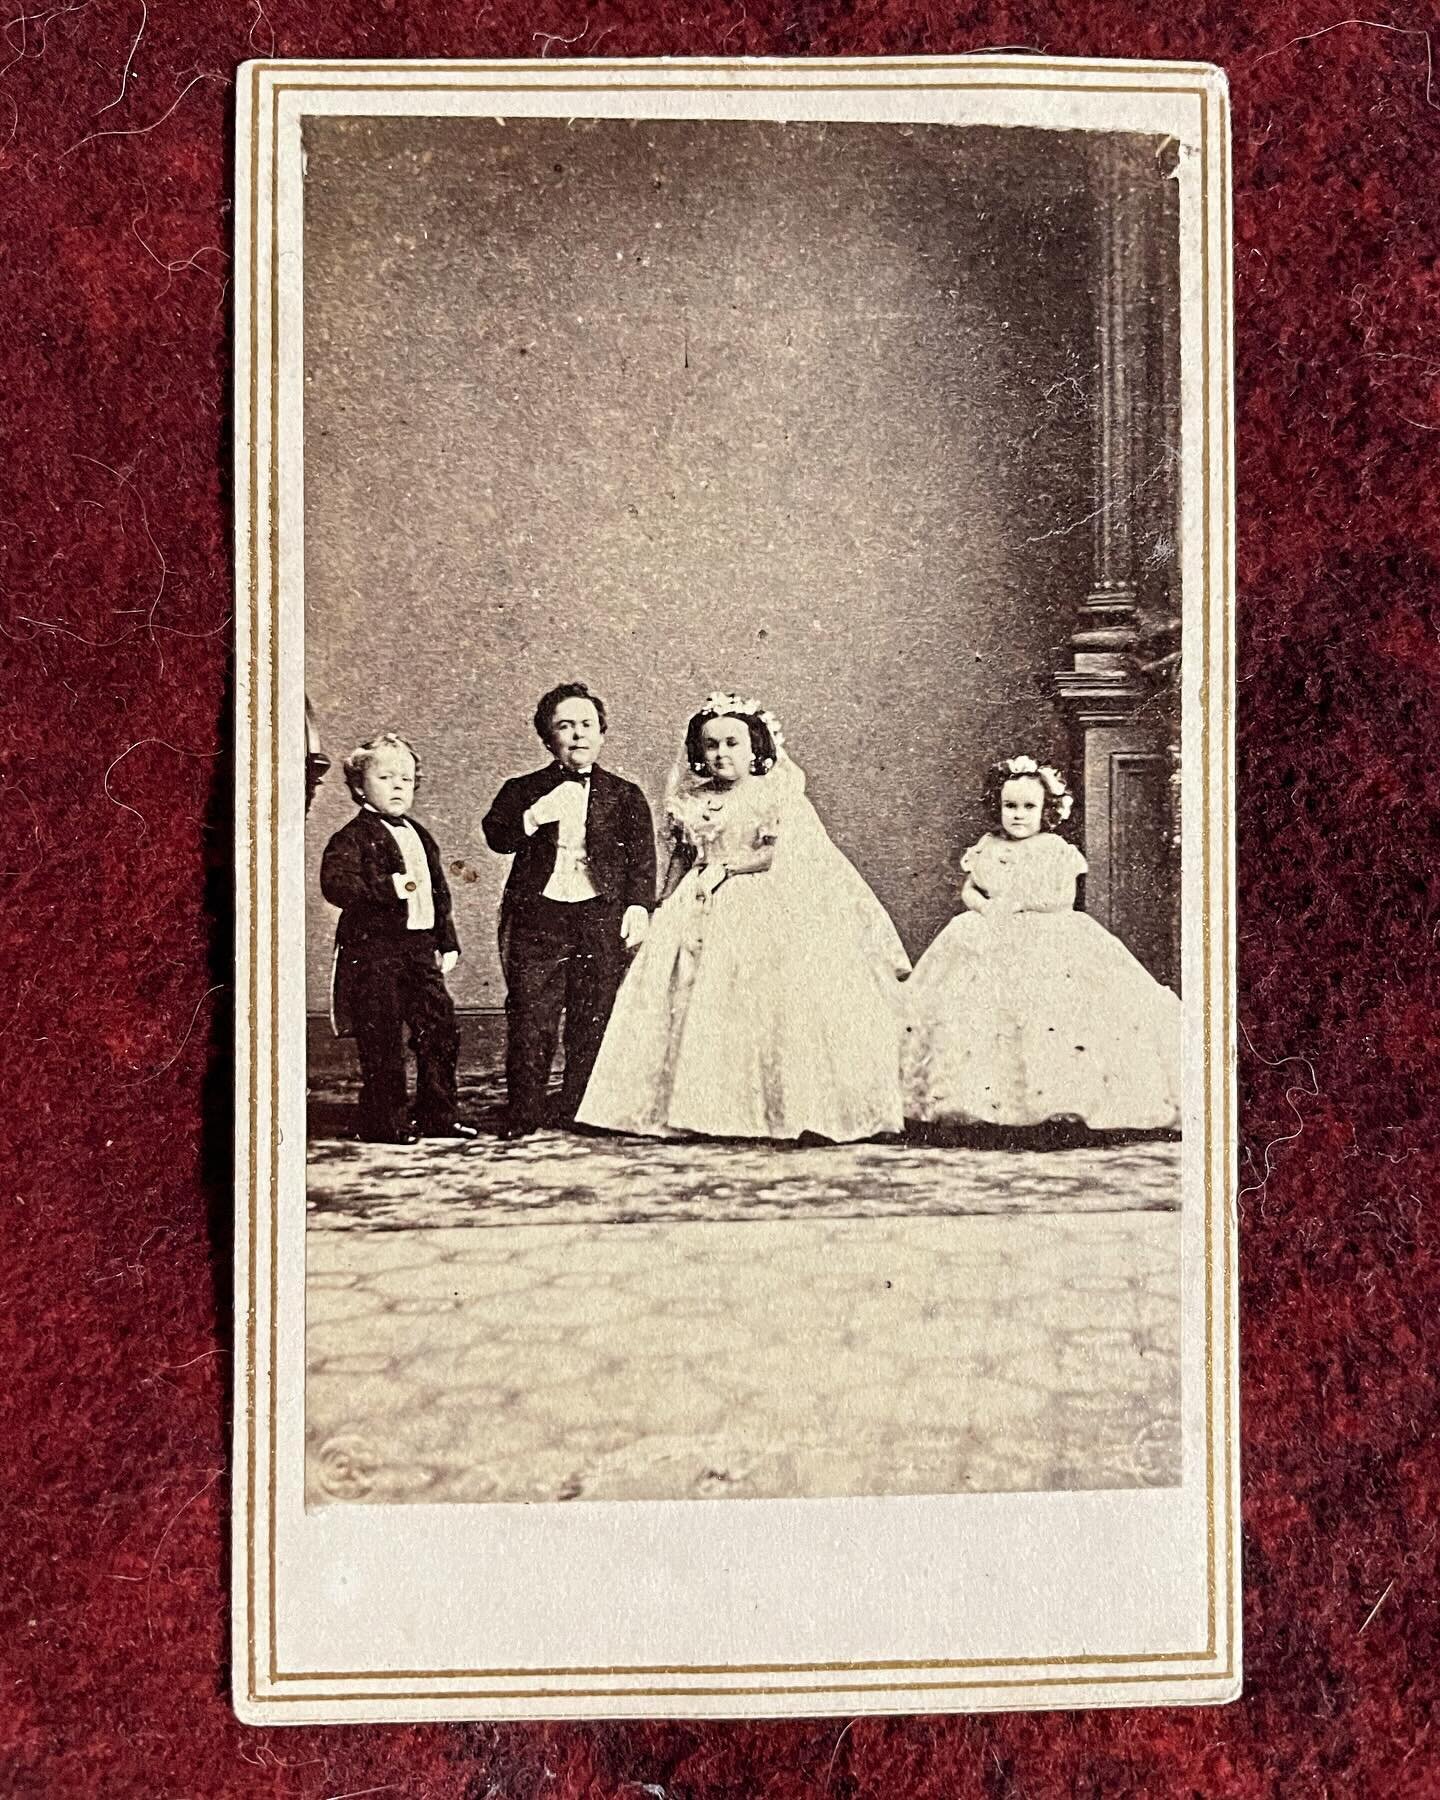 The second newest acquisition to the Cabinet of Curiosities, is this original cabinet card of General Tom Thumb&rsquo;s wedding on February 10, 1863. This card is currently 161 years old.
&gt;
&gt;
This cabinet card features the wedding party which c